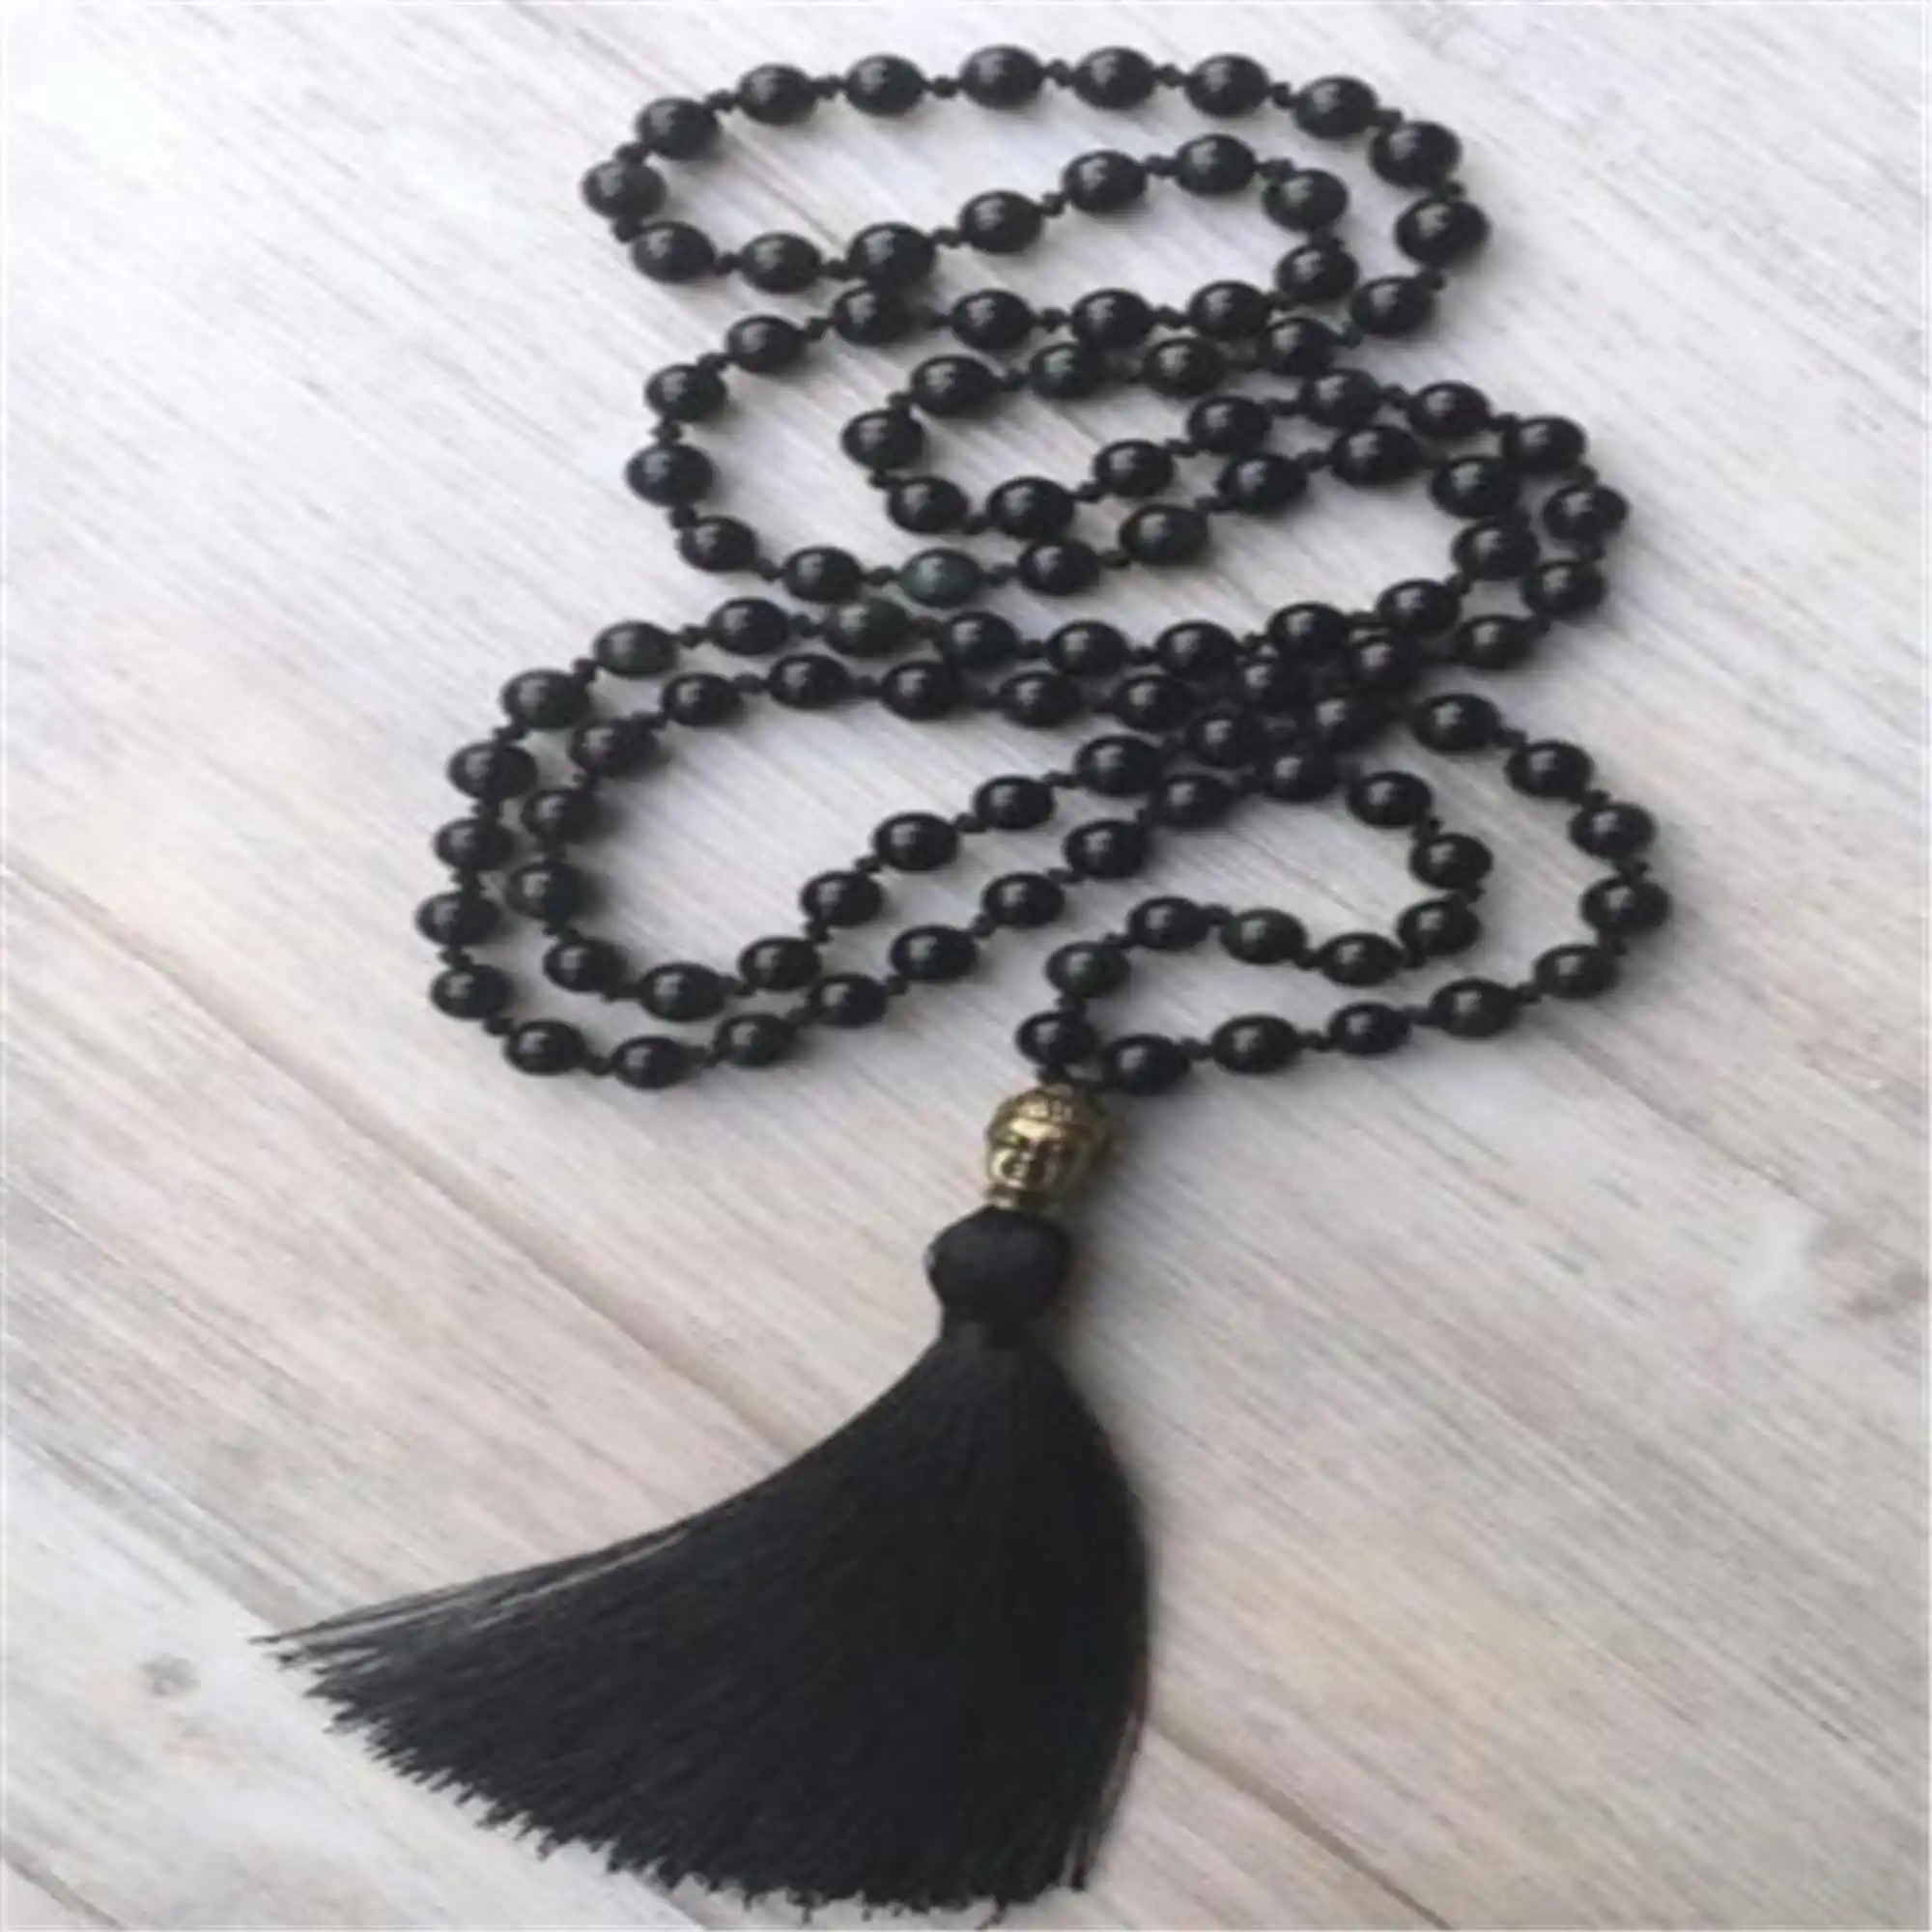 

6MM Natural Obsidian black 108 gemstone knot Necklace Chain Calming Relief Wrist Bohemia Restore Inspiration Energy spread